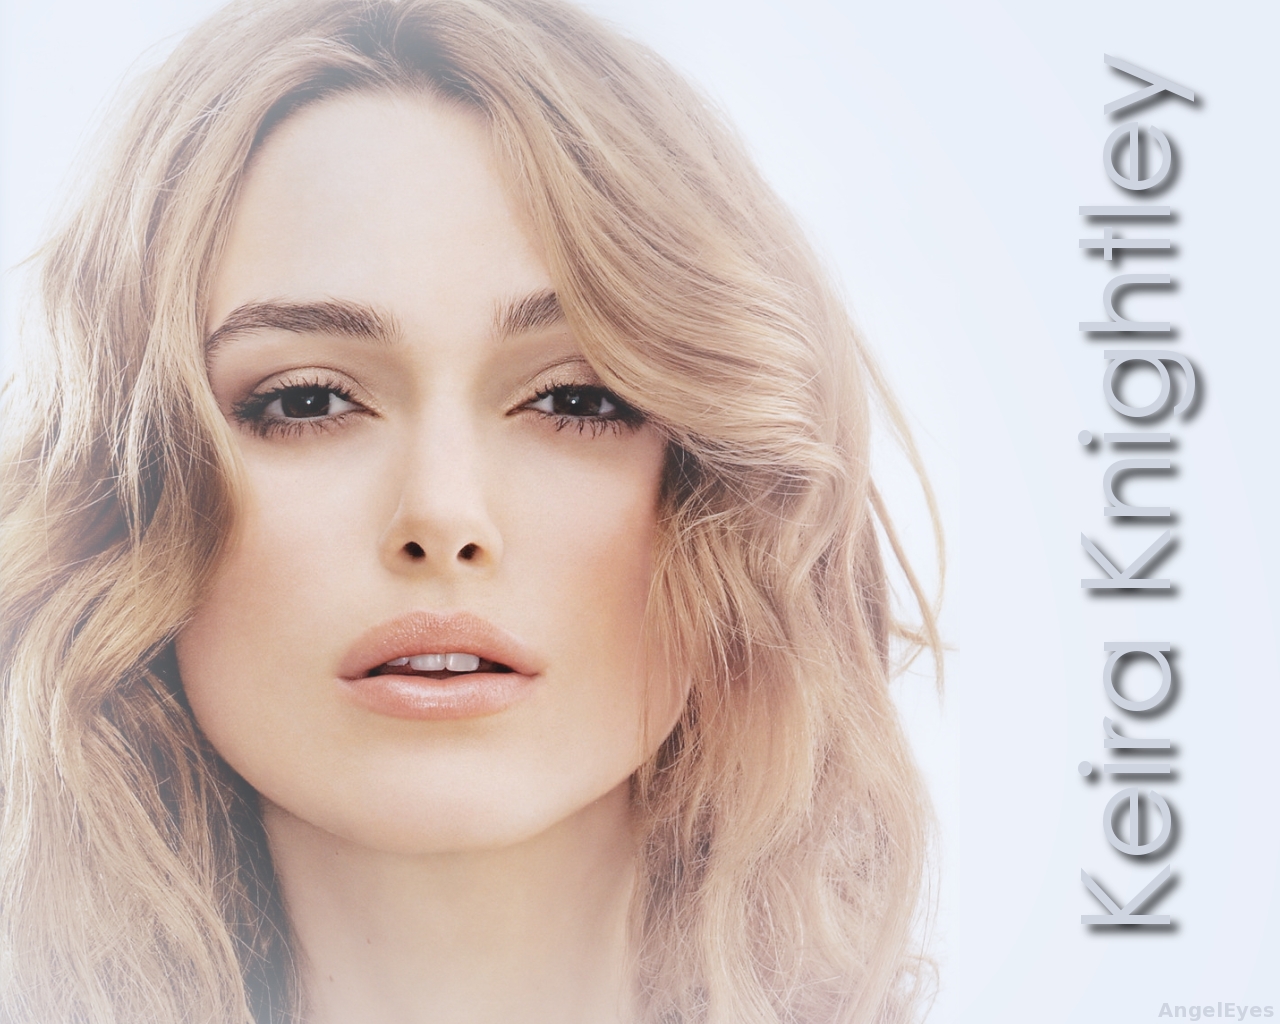 Download High quality Keira Knightley wallpaper / Celebrities Female / 1280x1024